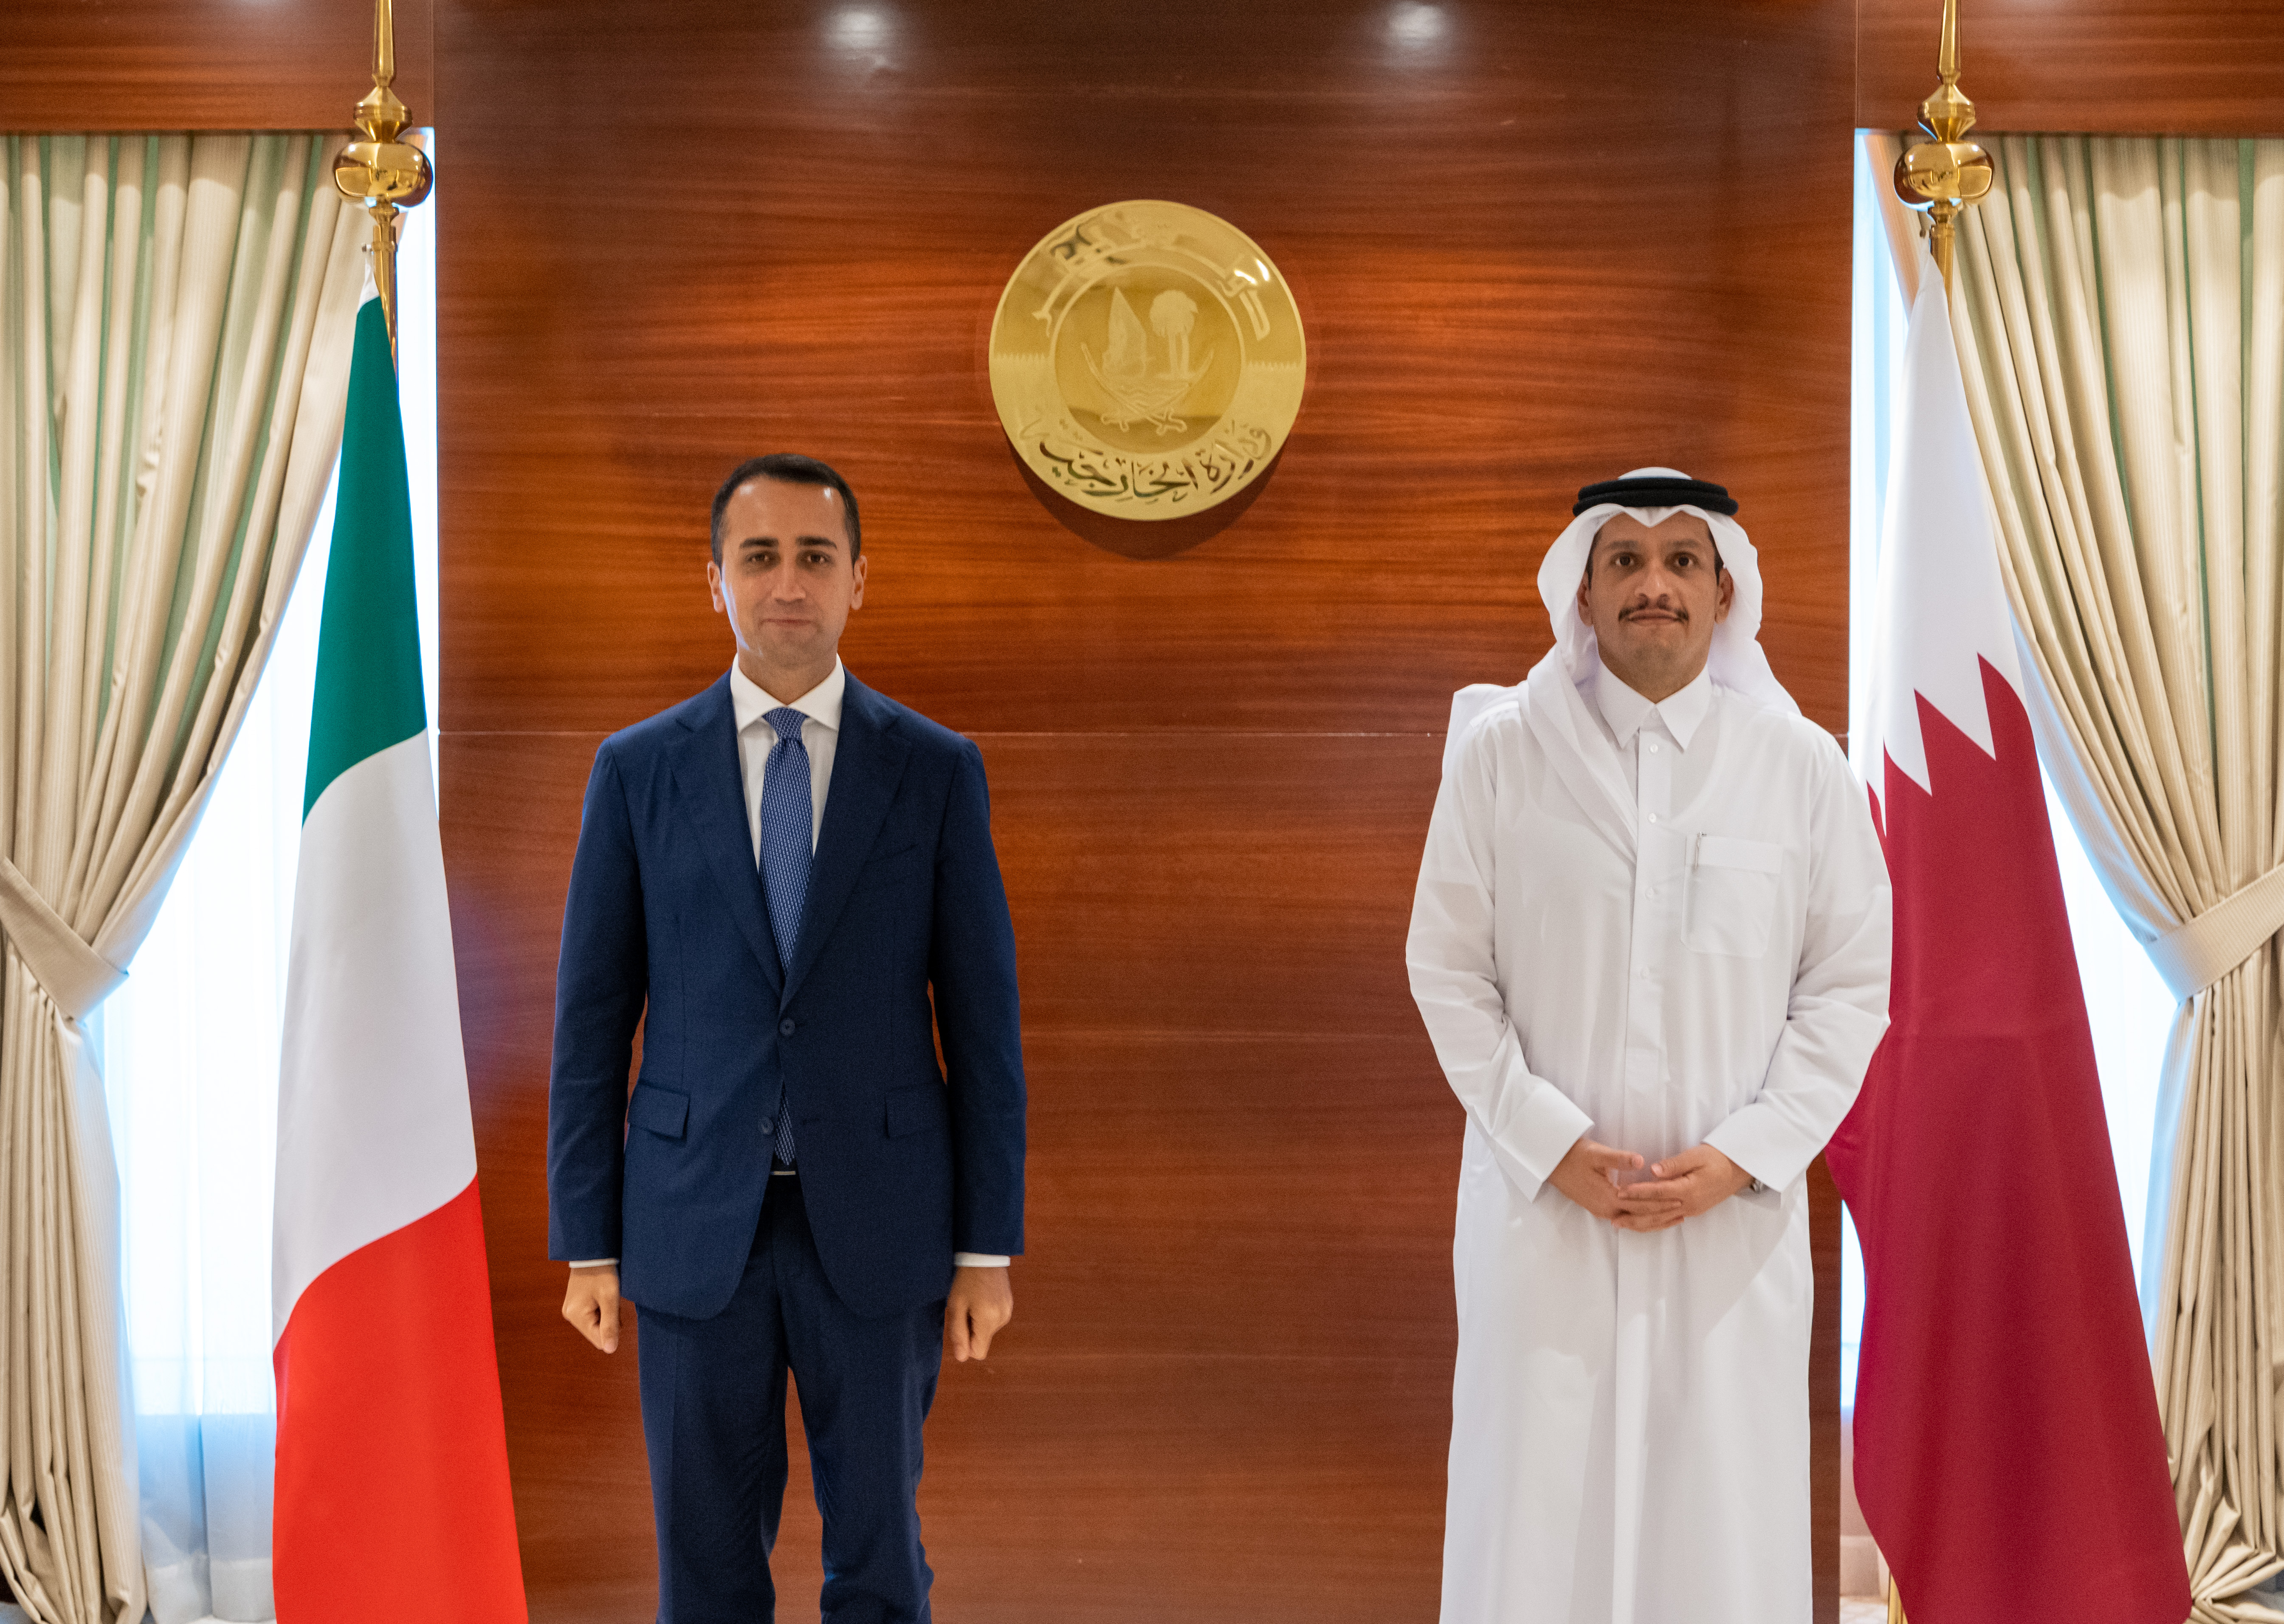 Deputy Prime Minister and Minister of Foreign Affairs Meets Italian Minister of Foreign Affairs and International Cooperation